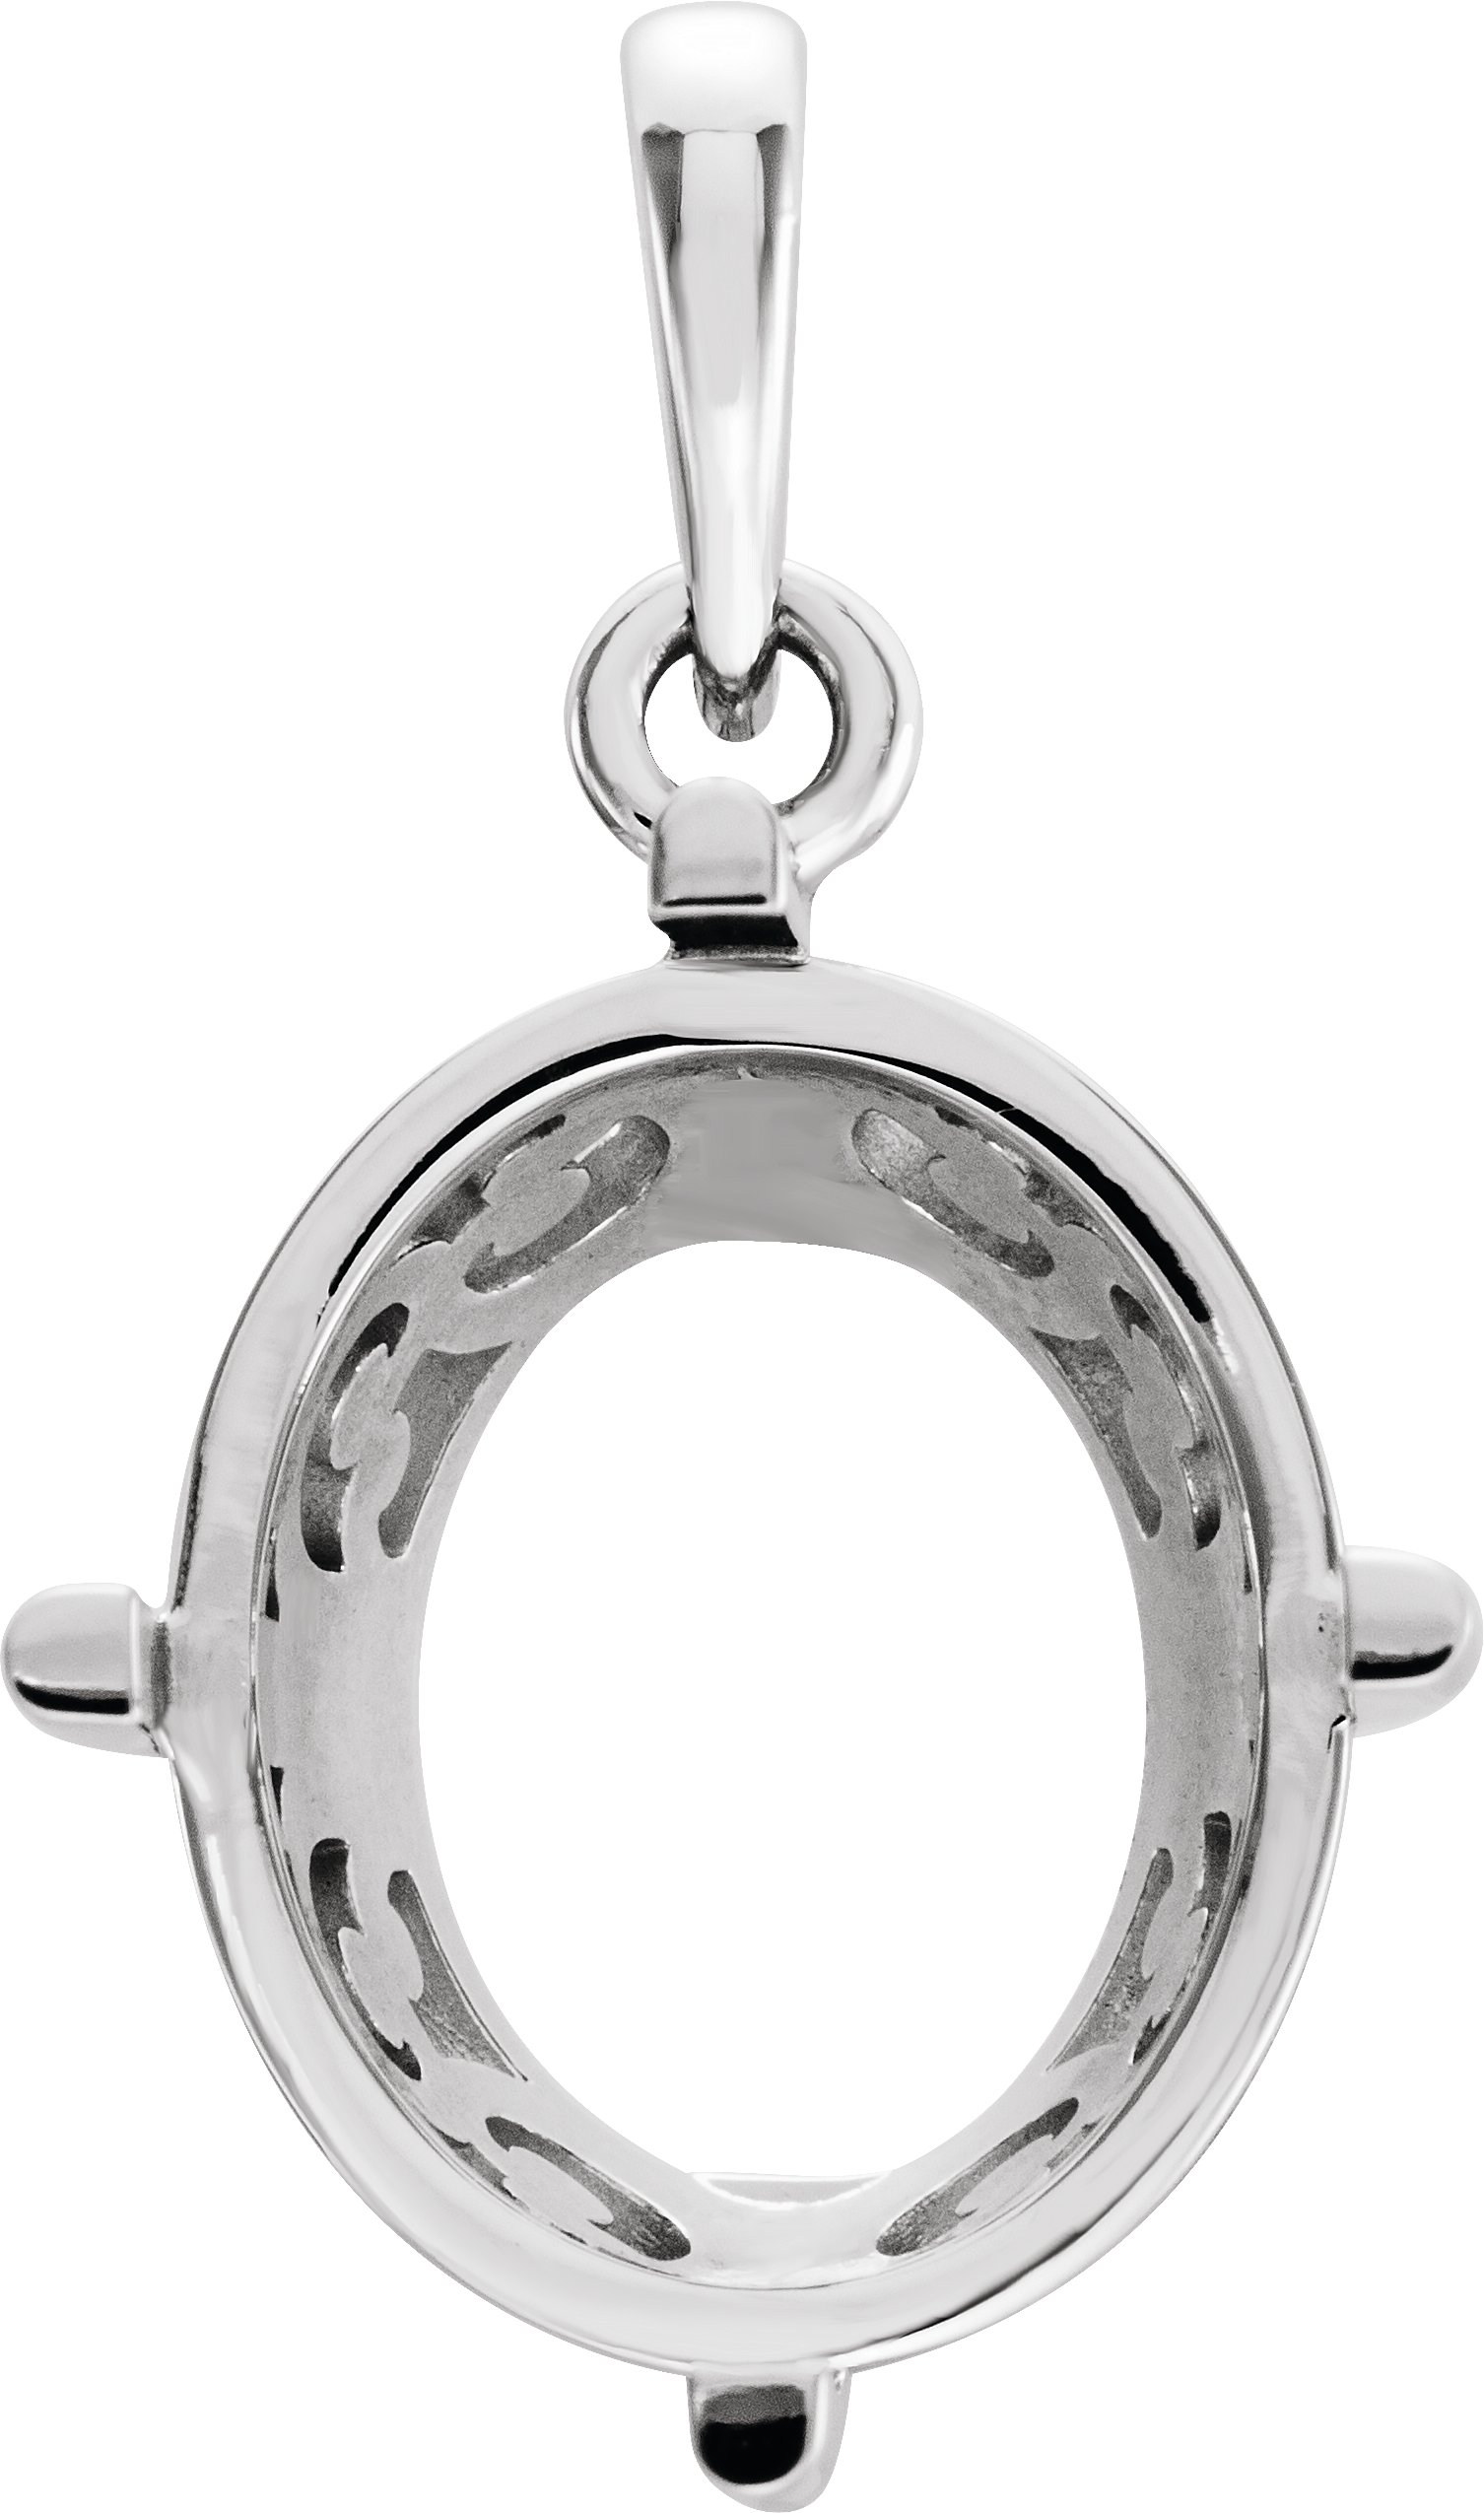 652169 / Sterling Silver / 10 Mm / Polished / Oval 4-Prong Pendant Mounting